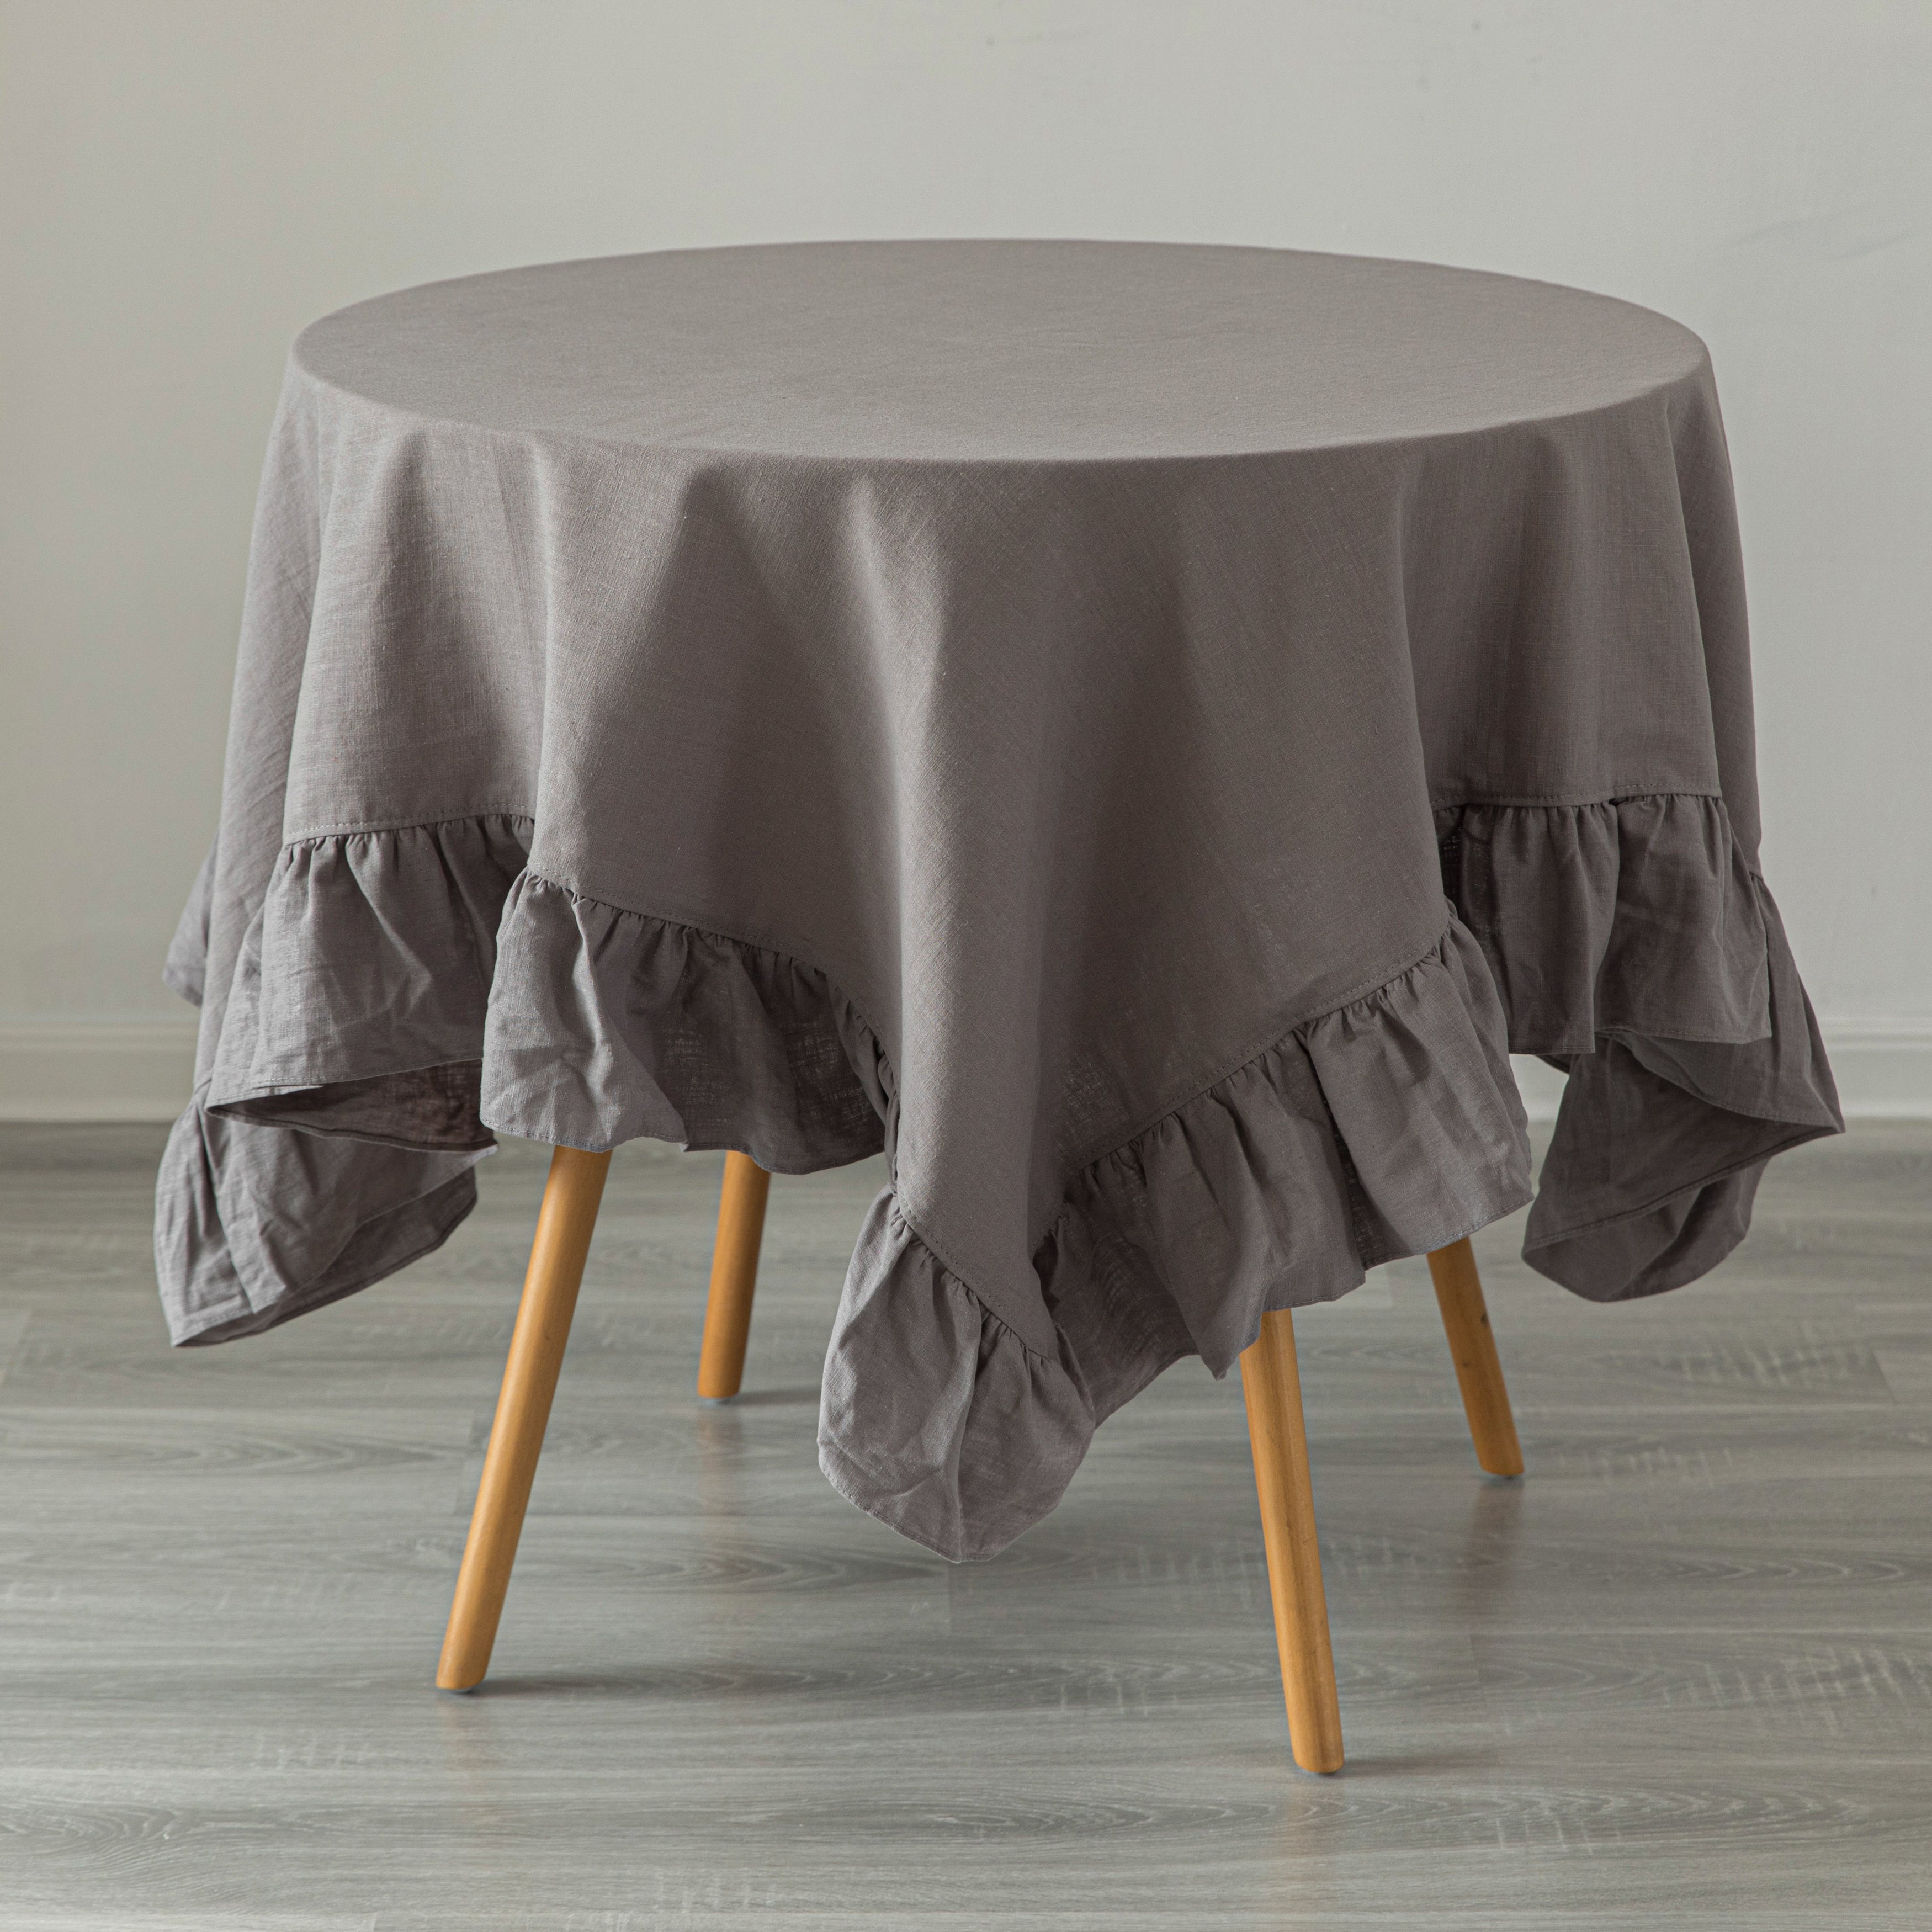 Deerlux 100 Percent Pure Linen Washable Tablecloth With Ruffle Trim - 60 X 80 In. Gray